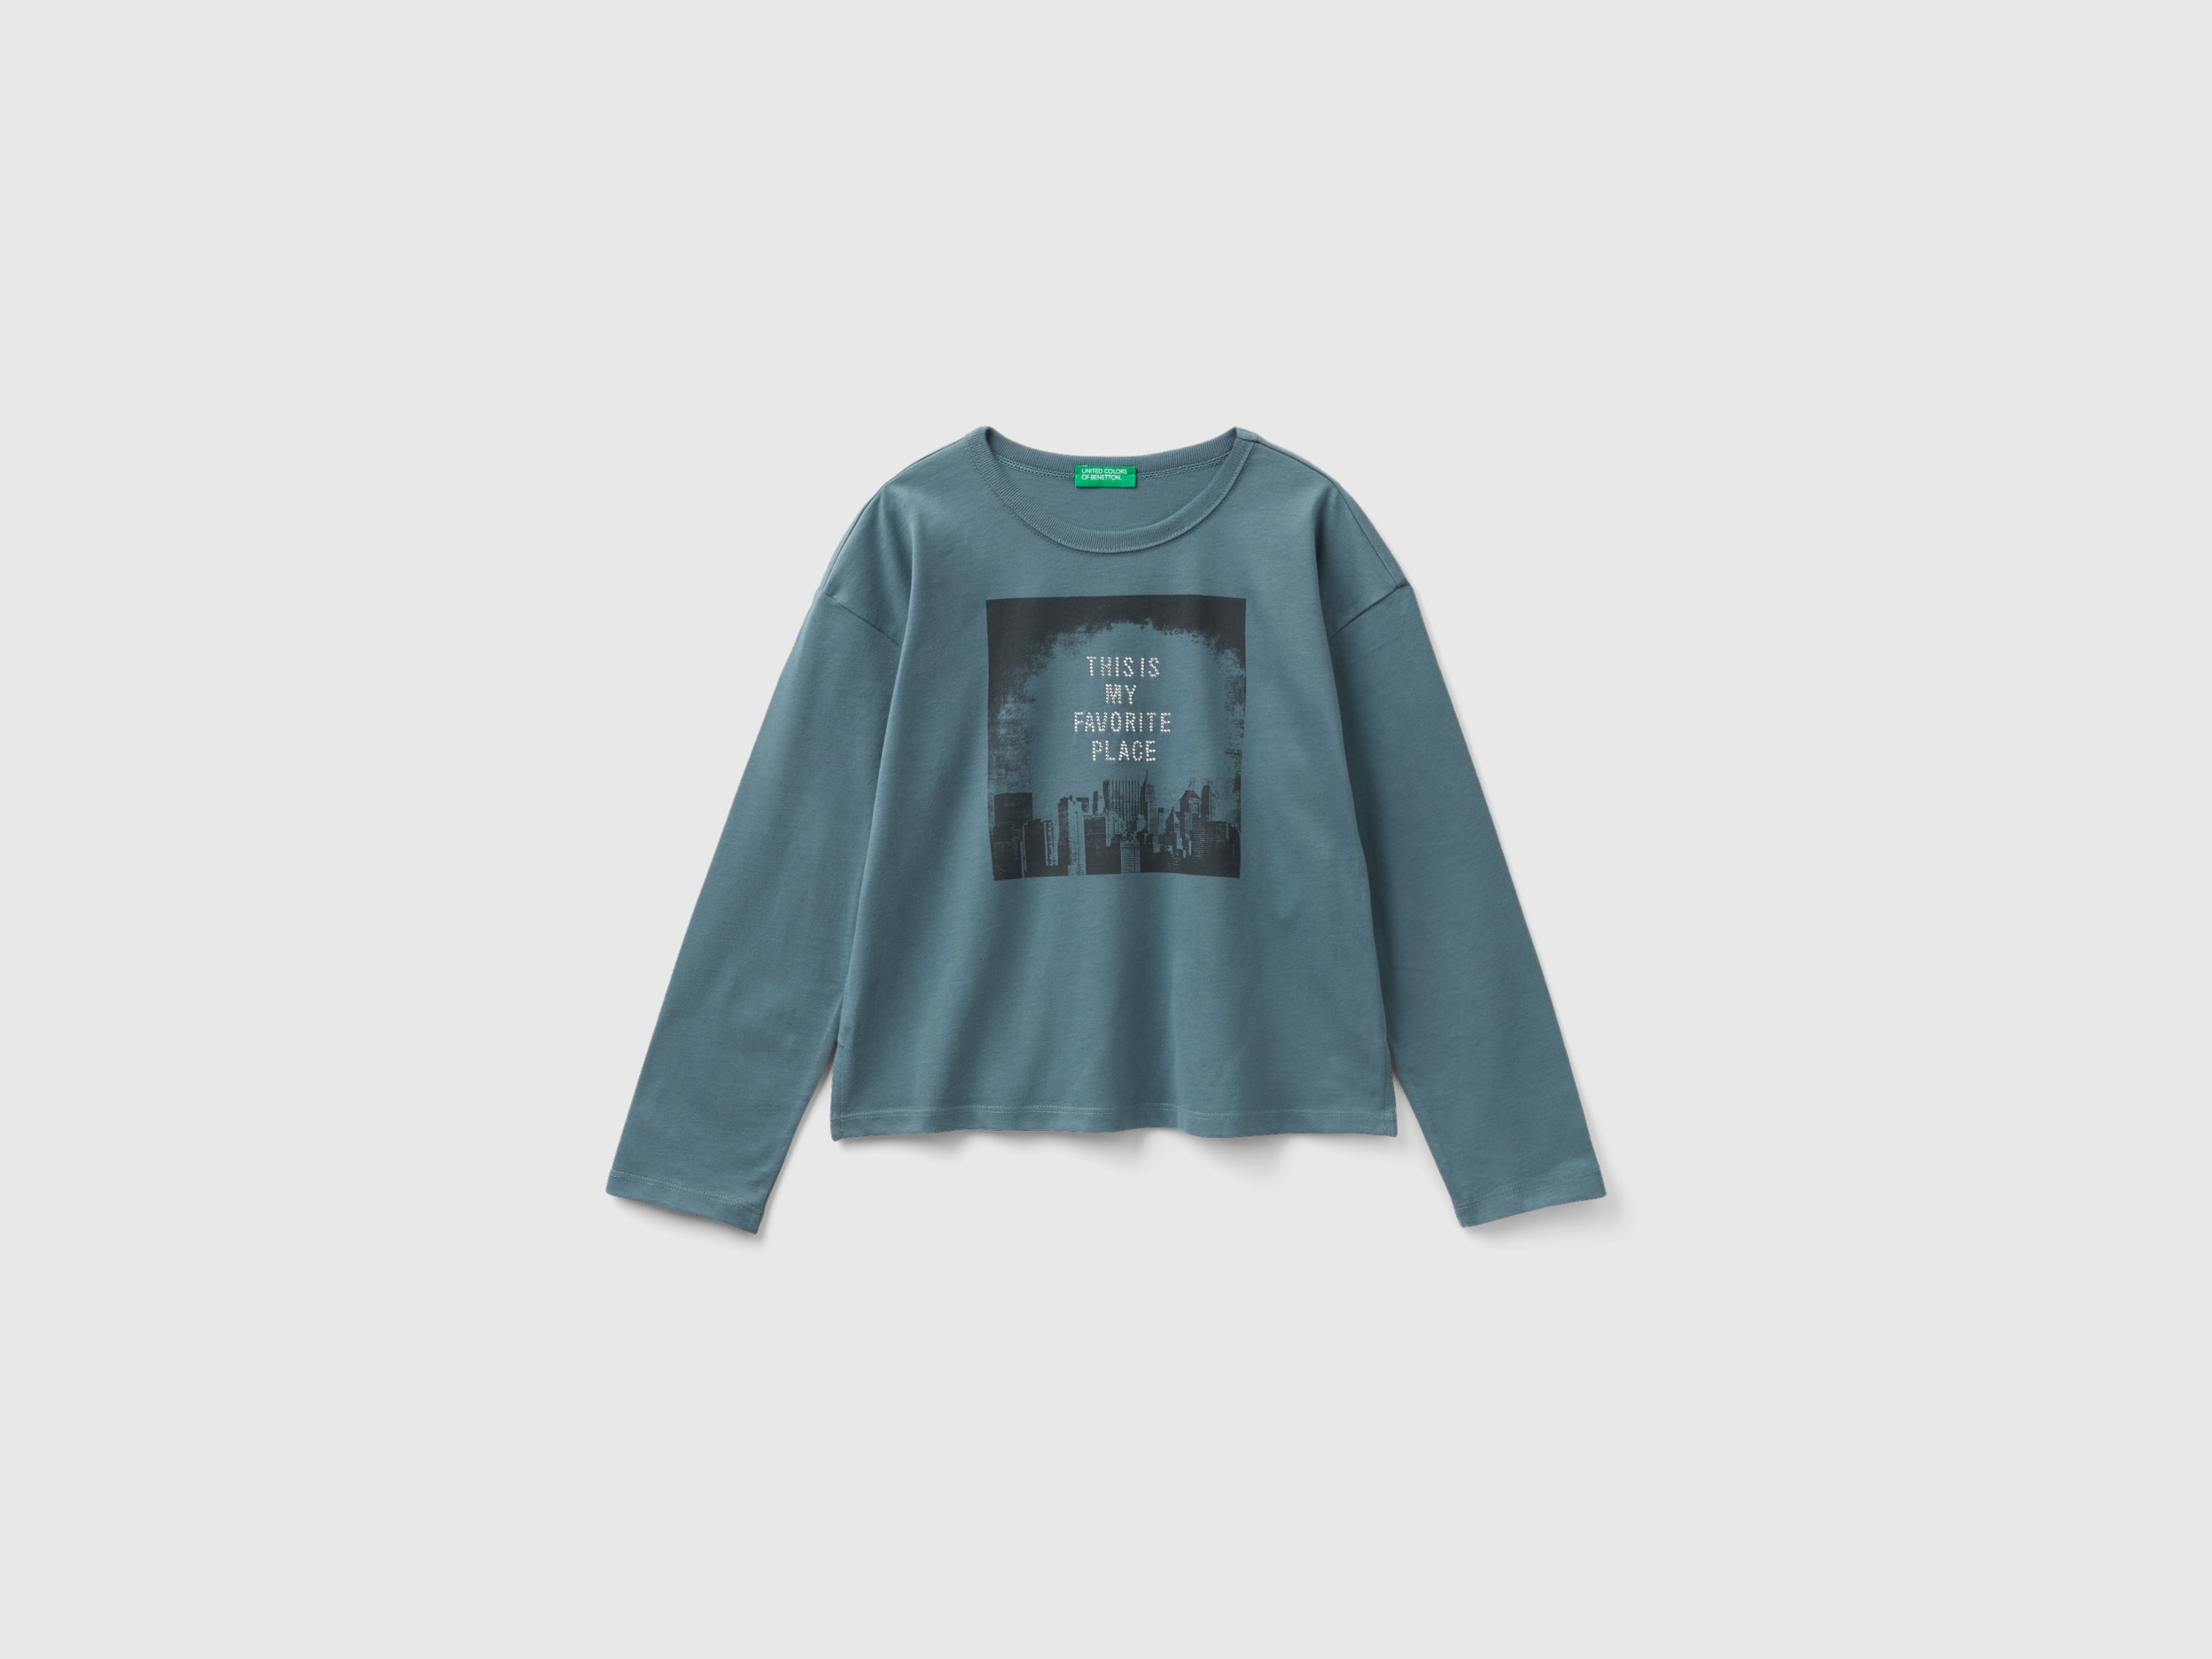 Benetton, T-shirt With Print And Studs, size 3XL, Teal, Kids